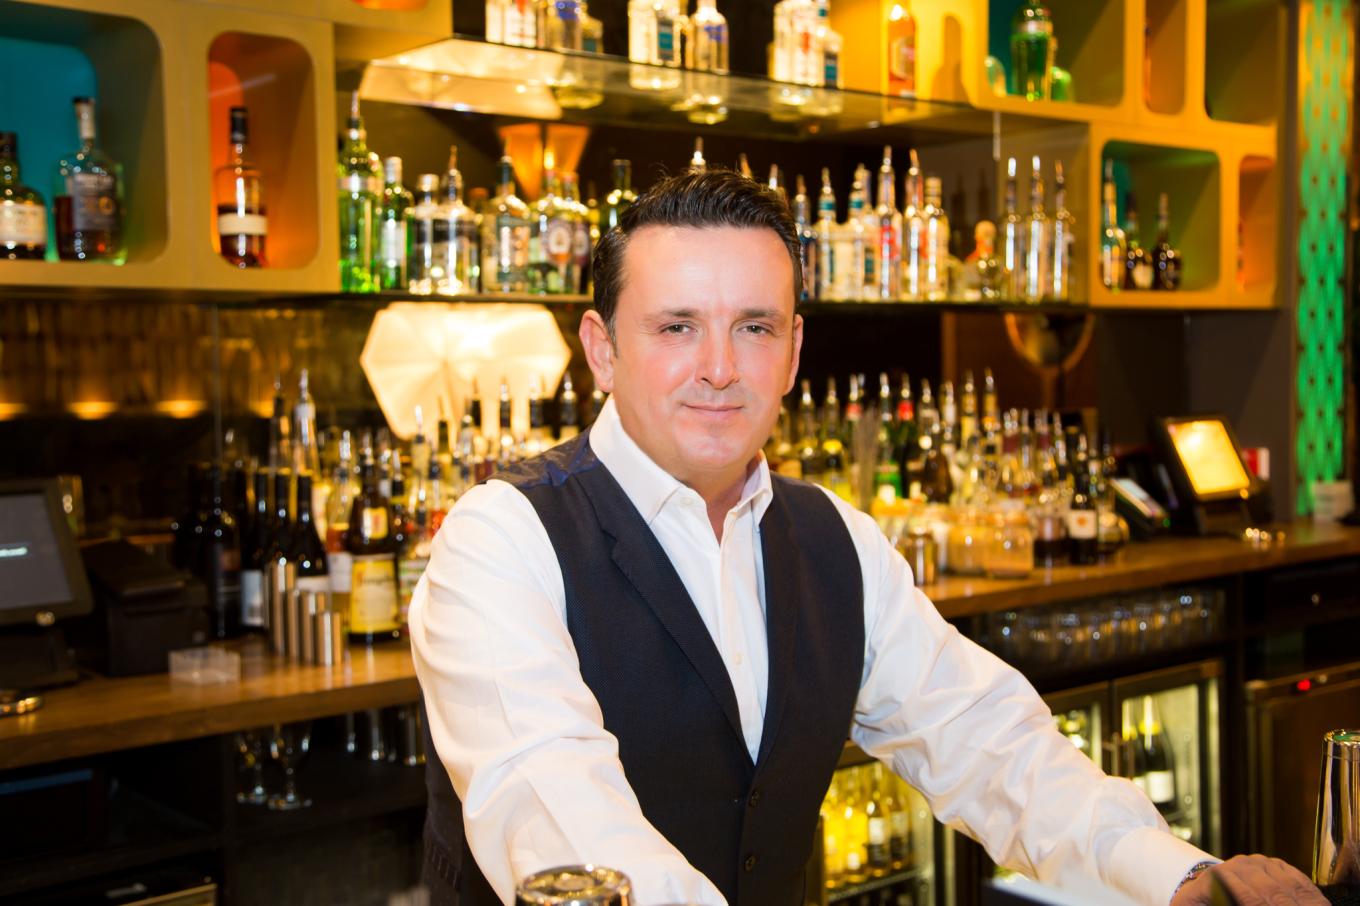 Scott Matthews, CEO of DC Bars, behind the bar in one of his premises